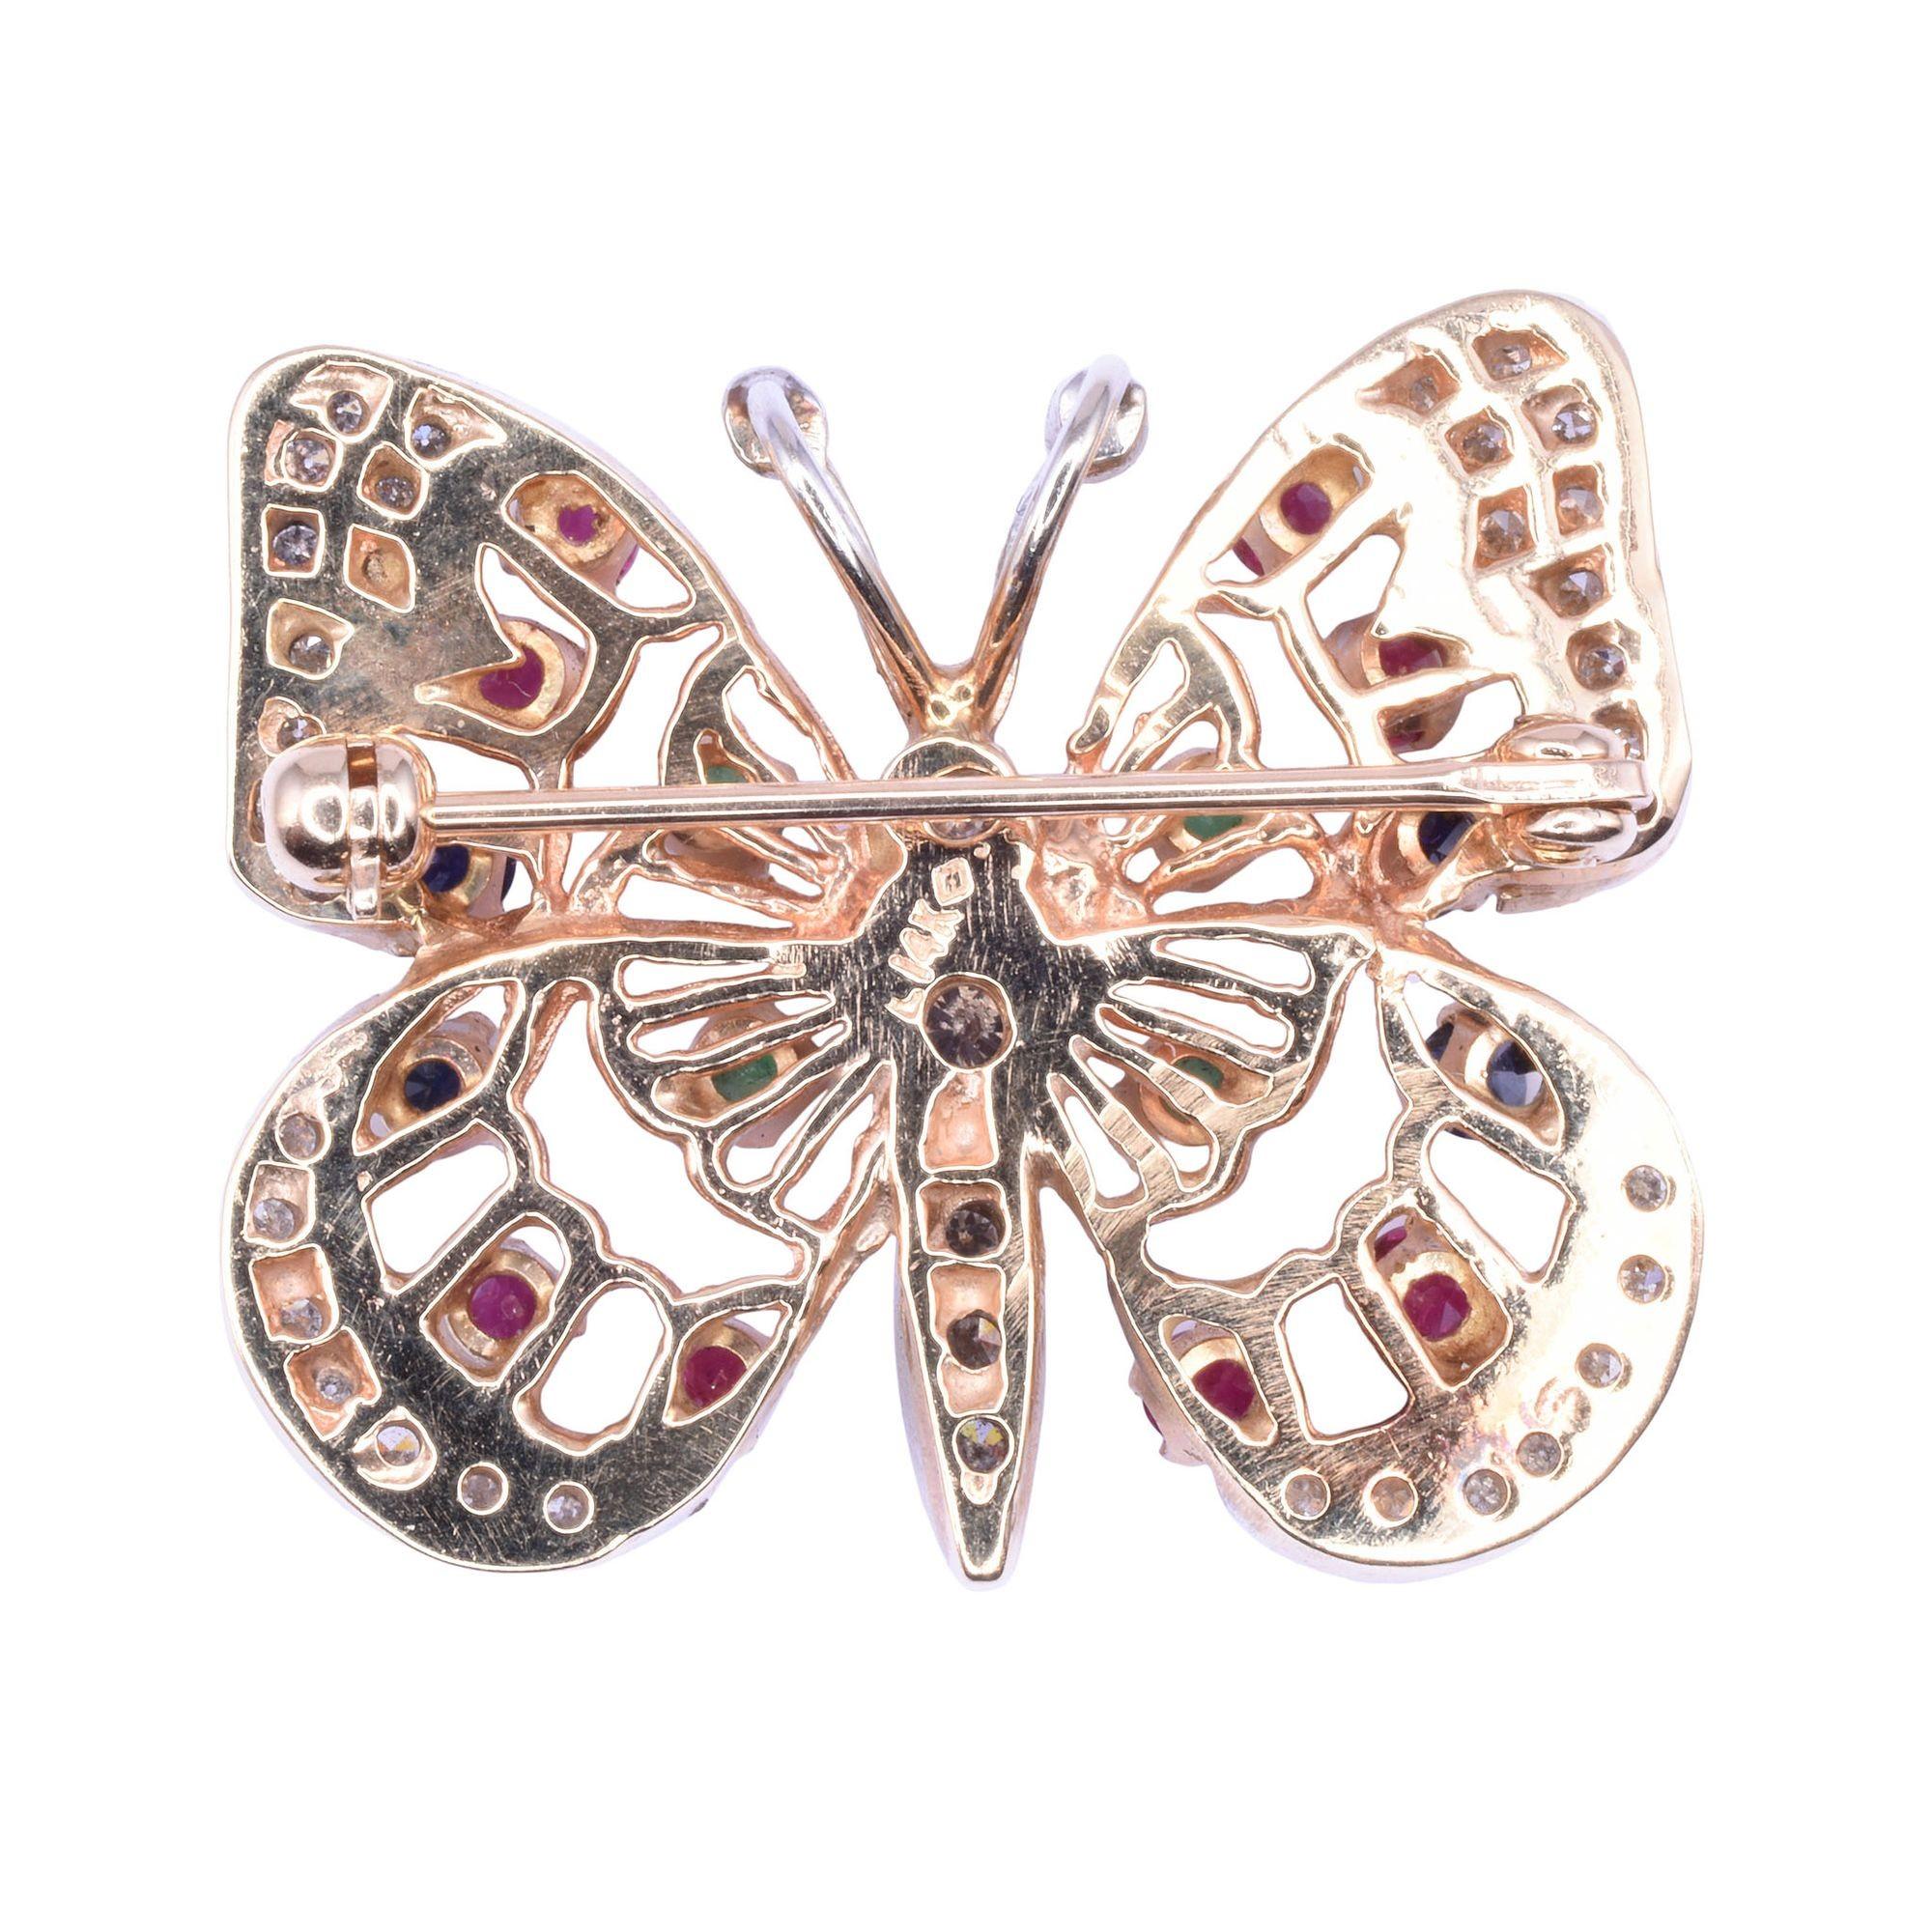 Estate multi gemstone butterfly pin or pendant. This 14 karat yellow gold butterfly may be worn as a pin or pendant. This butterfly is full of color featuring .30 CTW of rubies, .14 CTW of emeralds, .22 CTW of sapphires, and .40 CTW of diamonds